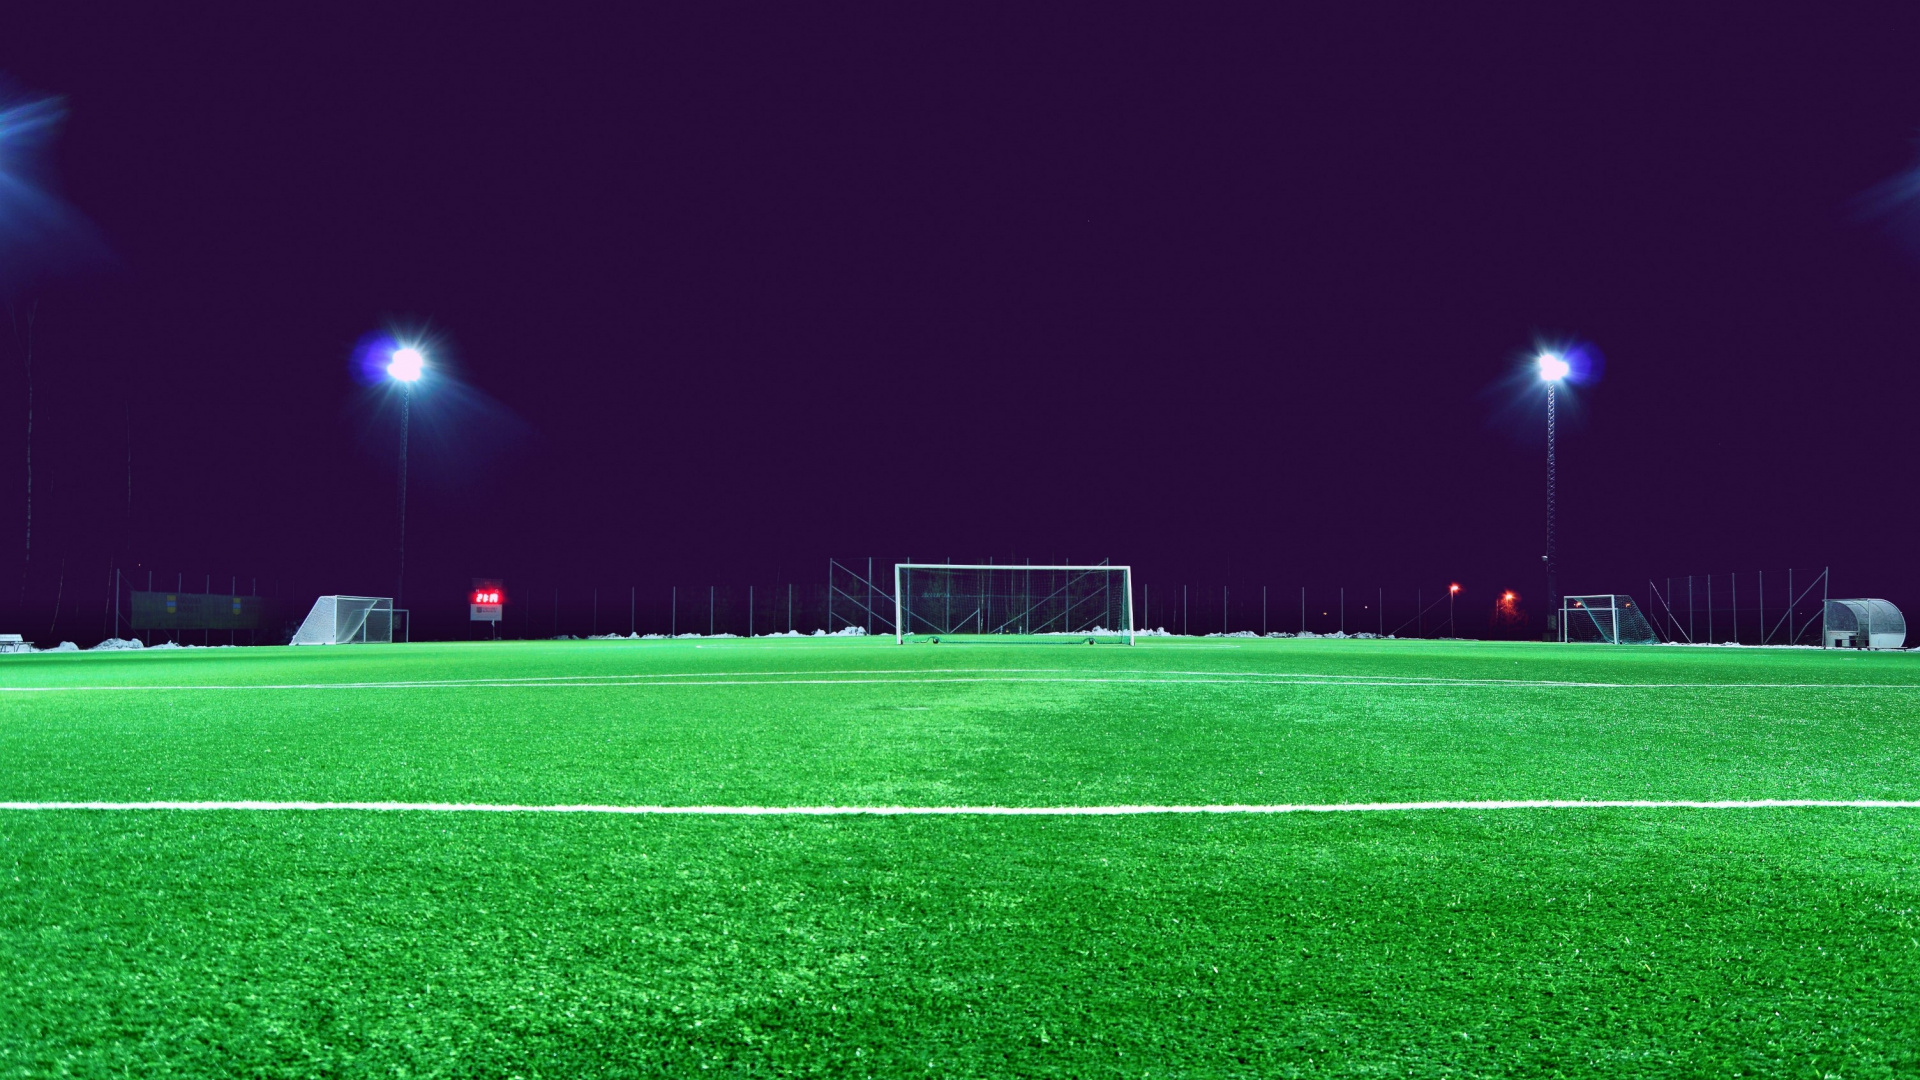 Soccer Goal Net on Green Field During Night Time. Wallpaper in 1920x1080 Resolution